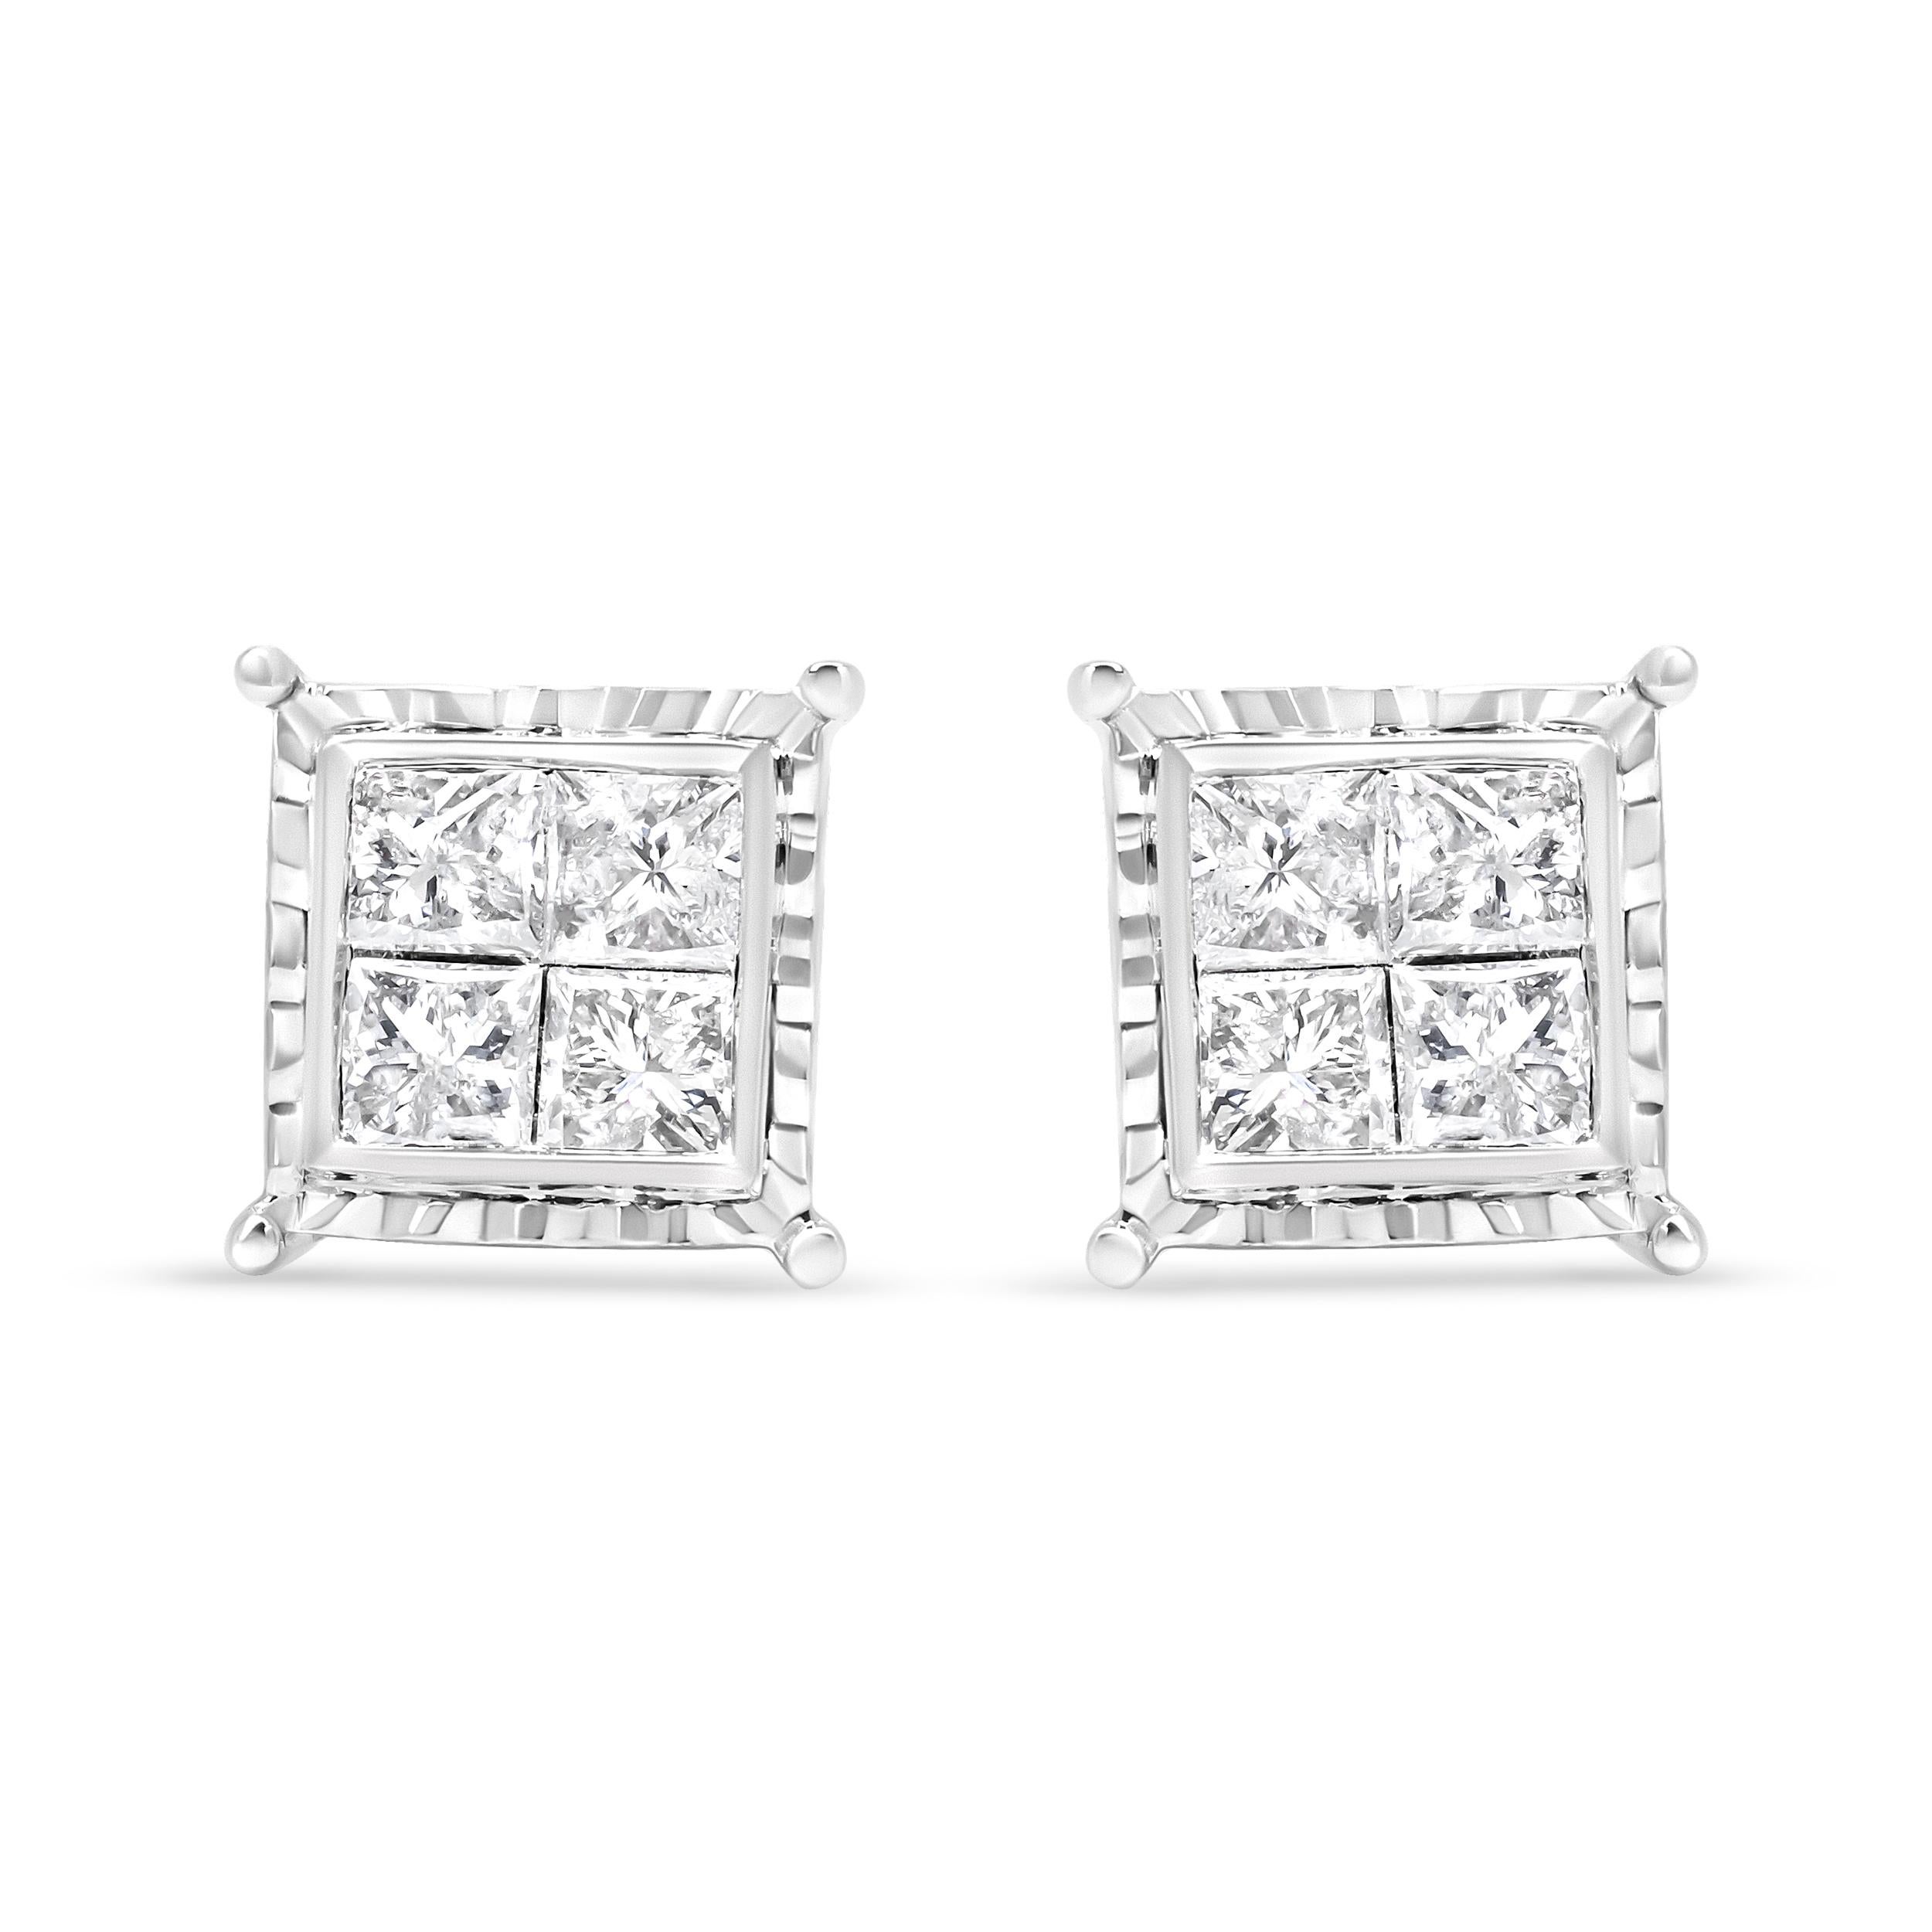 Experience the alluring sparkle of these quad stud diamond earrings. These attractive 14k white gold studs behold a striking contemporary silhouette in a geometric square shape with a wavy metalwork frame that graces your ears in modern grace. Each